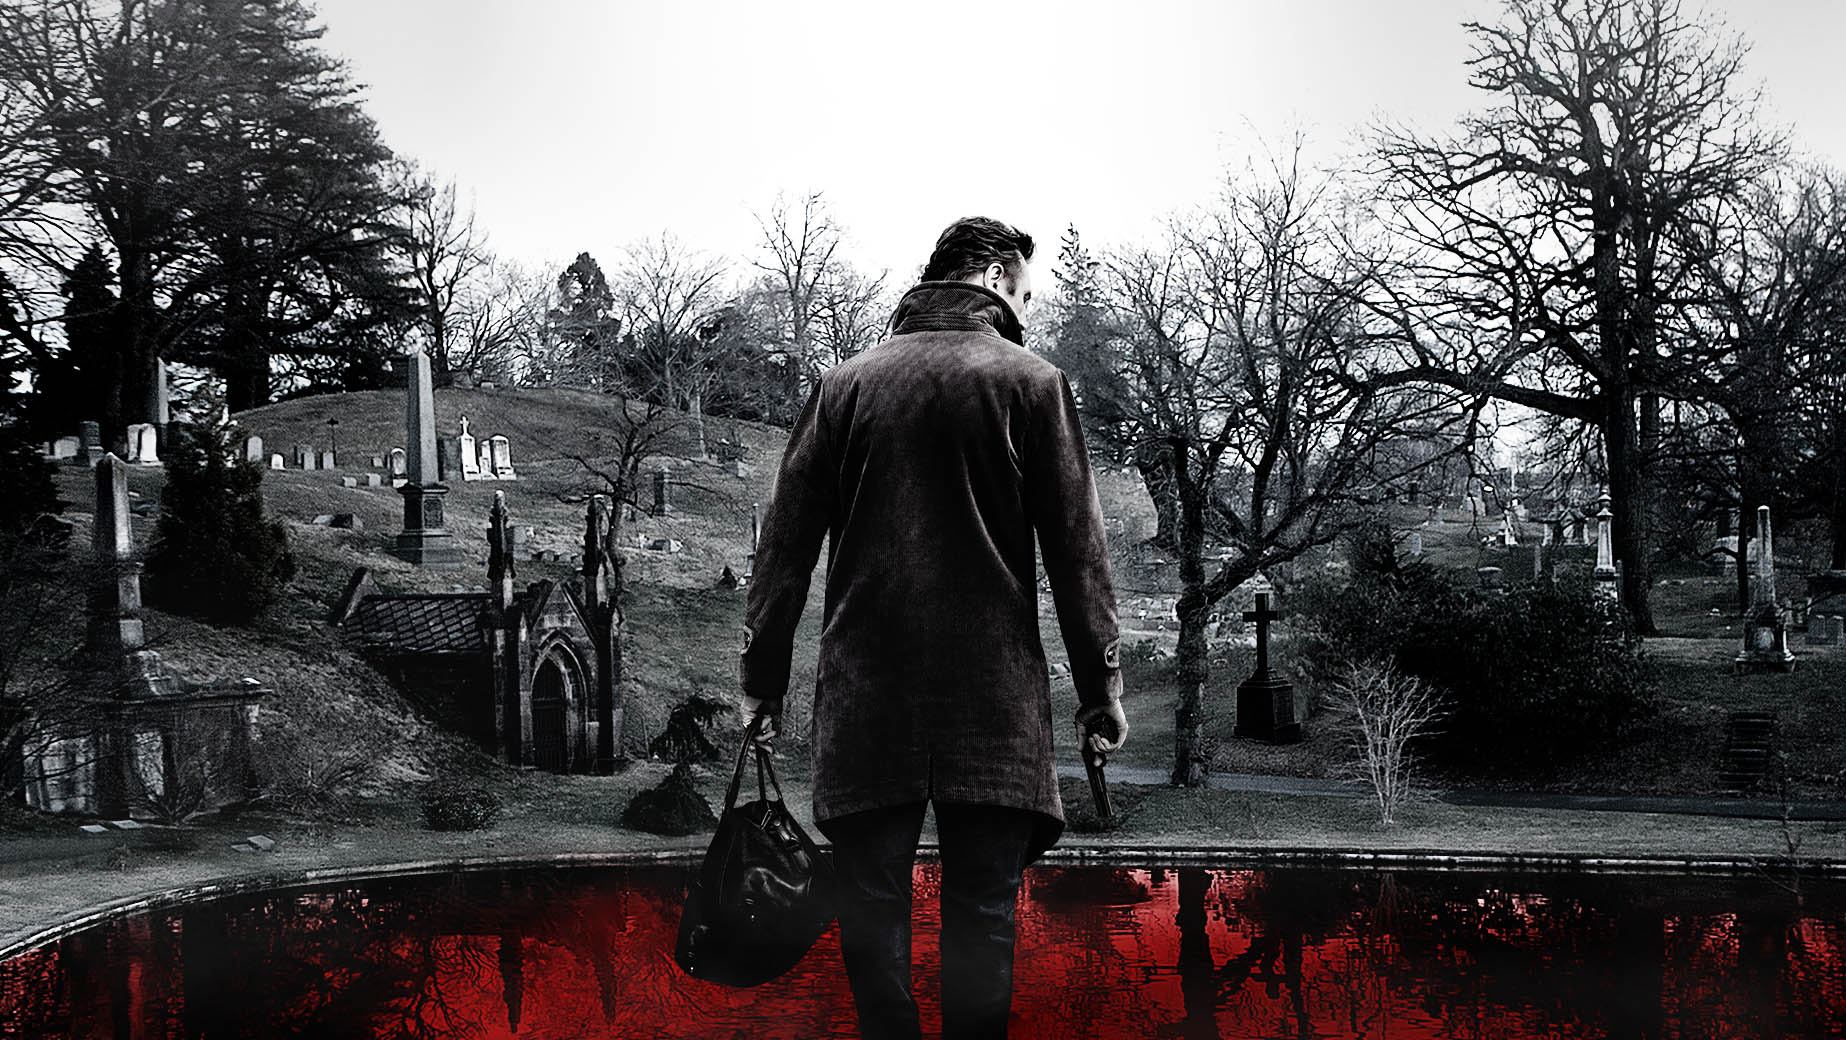 A Walk Among the Tombstones doesn’t tread new ground, but still offers thrills